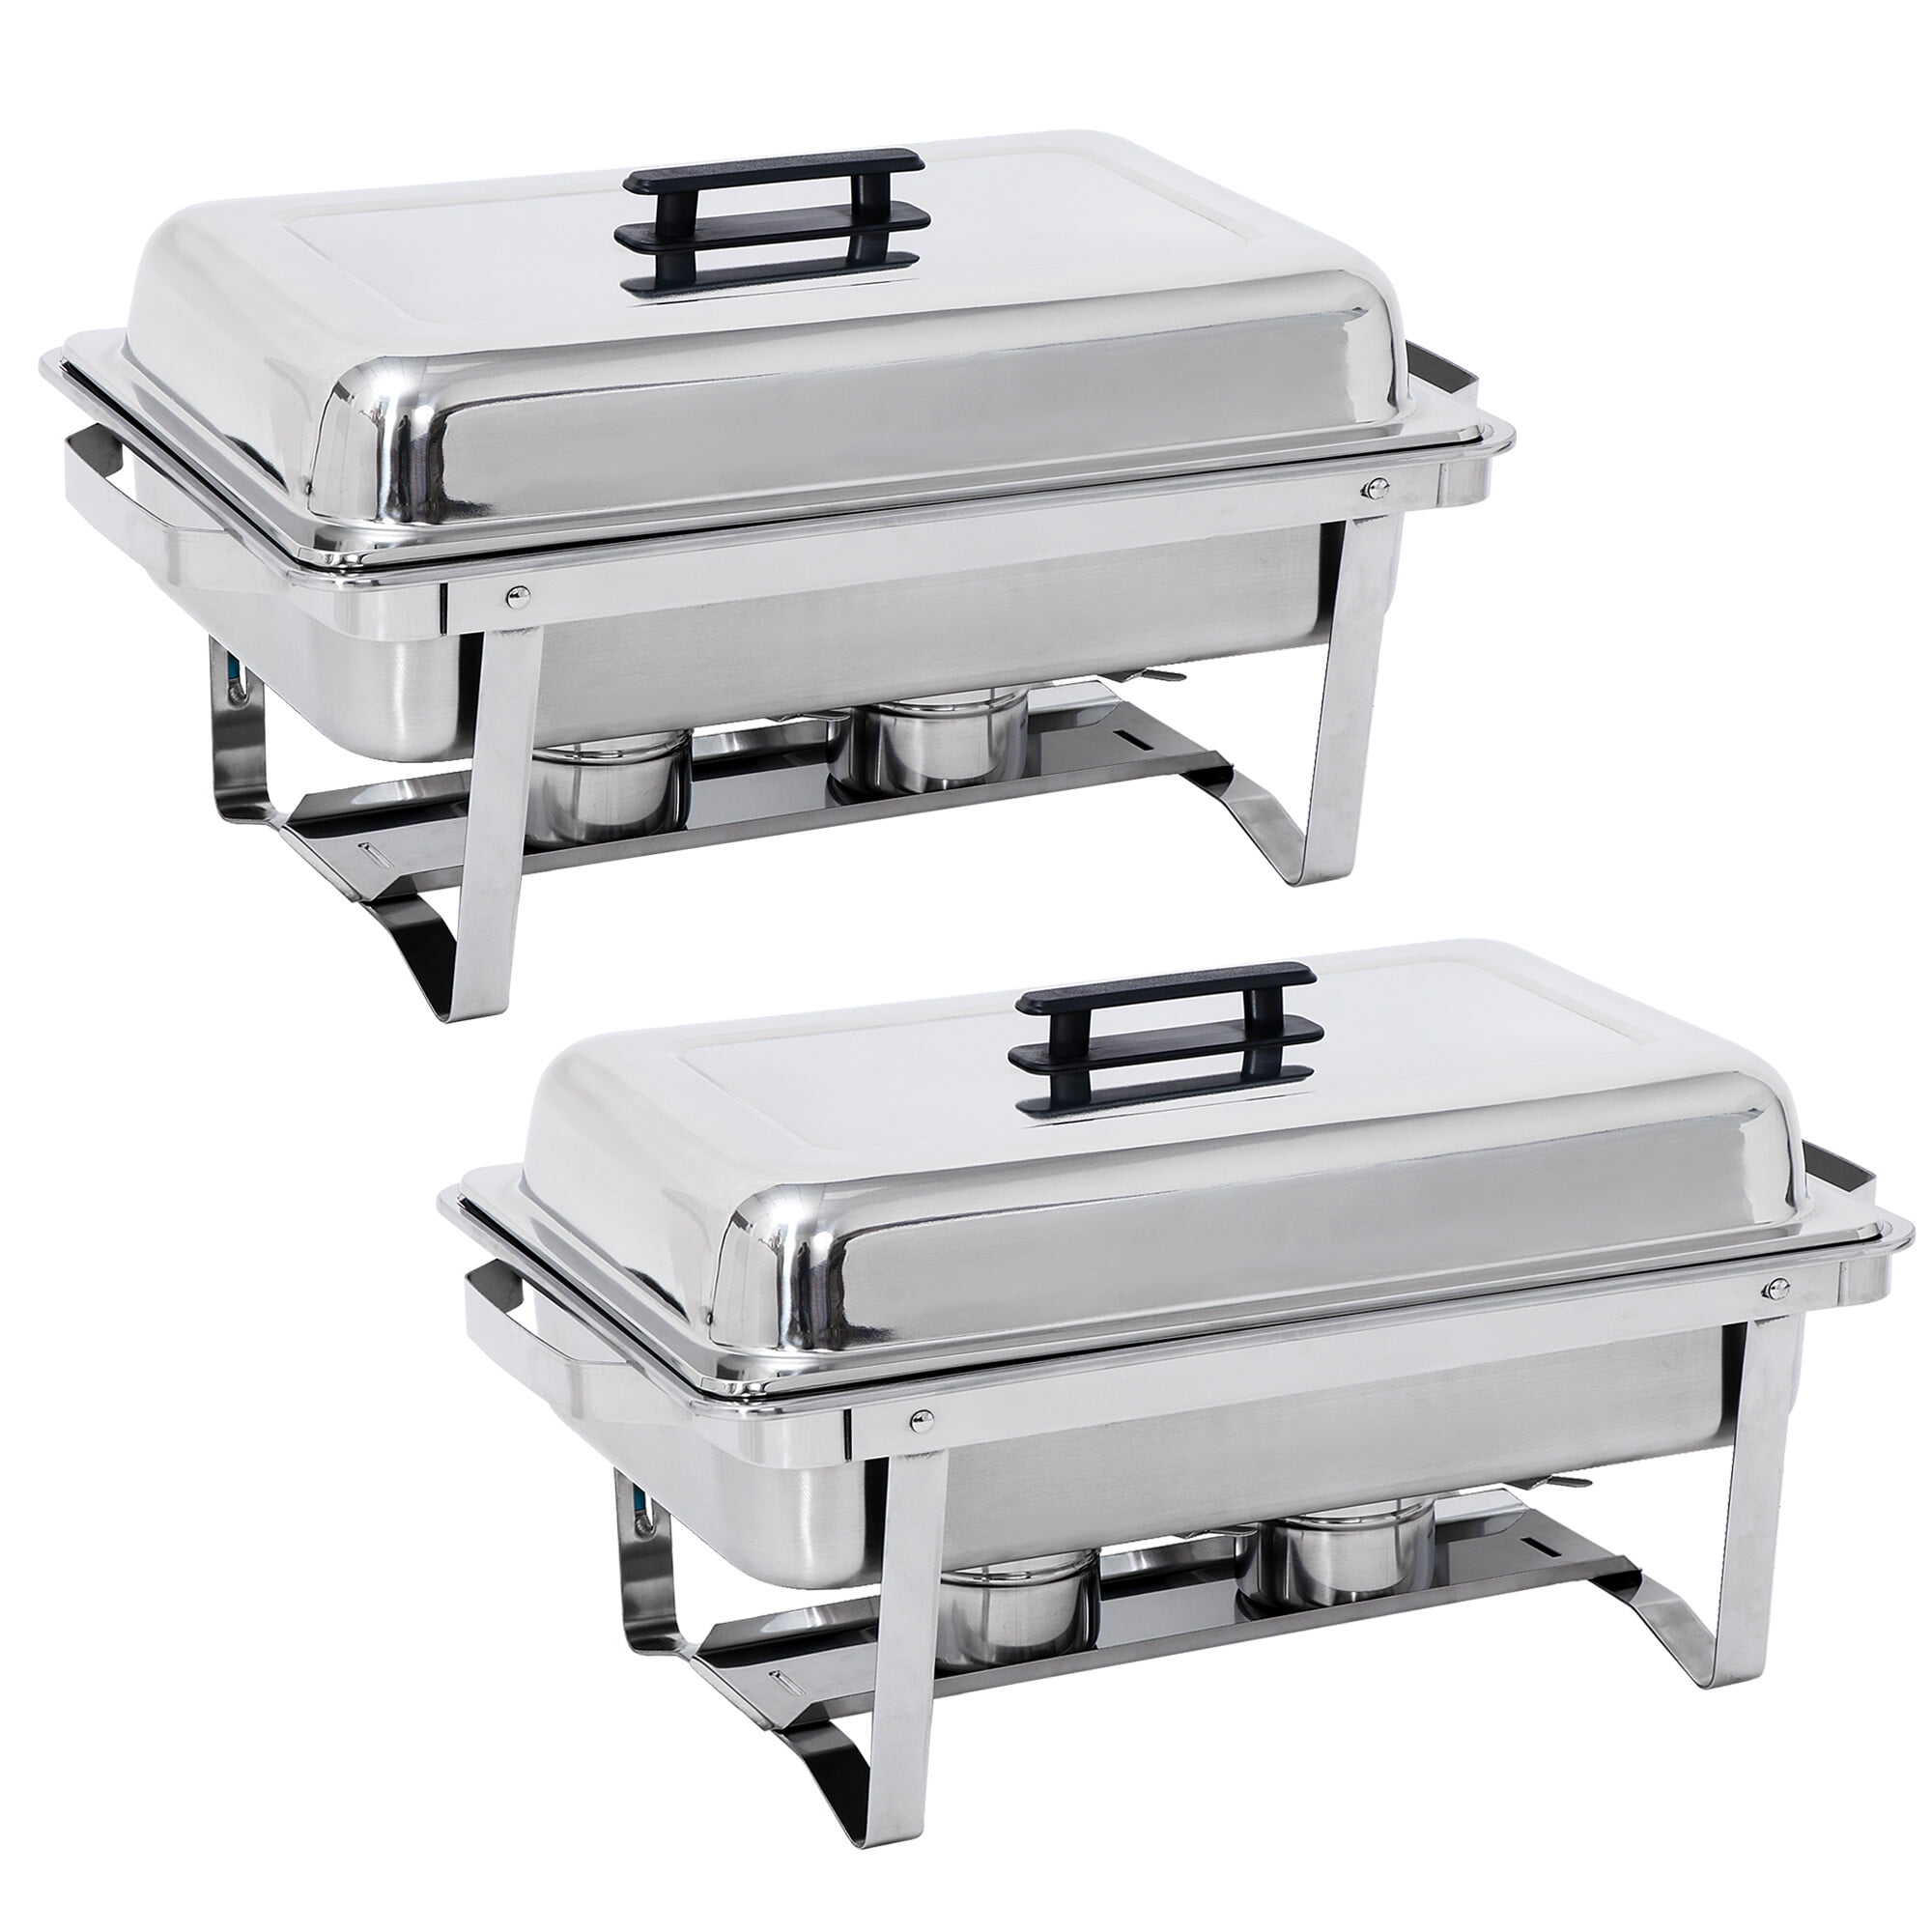 Details about   2 Pack 8 Quart&5 Quart Chafing Dish Stainless Steel Tray Buffet Catering Chafers 